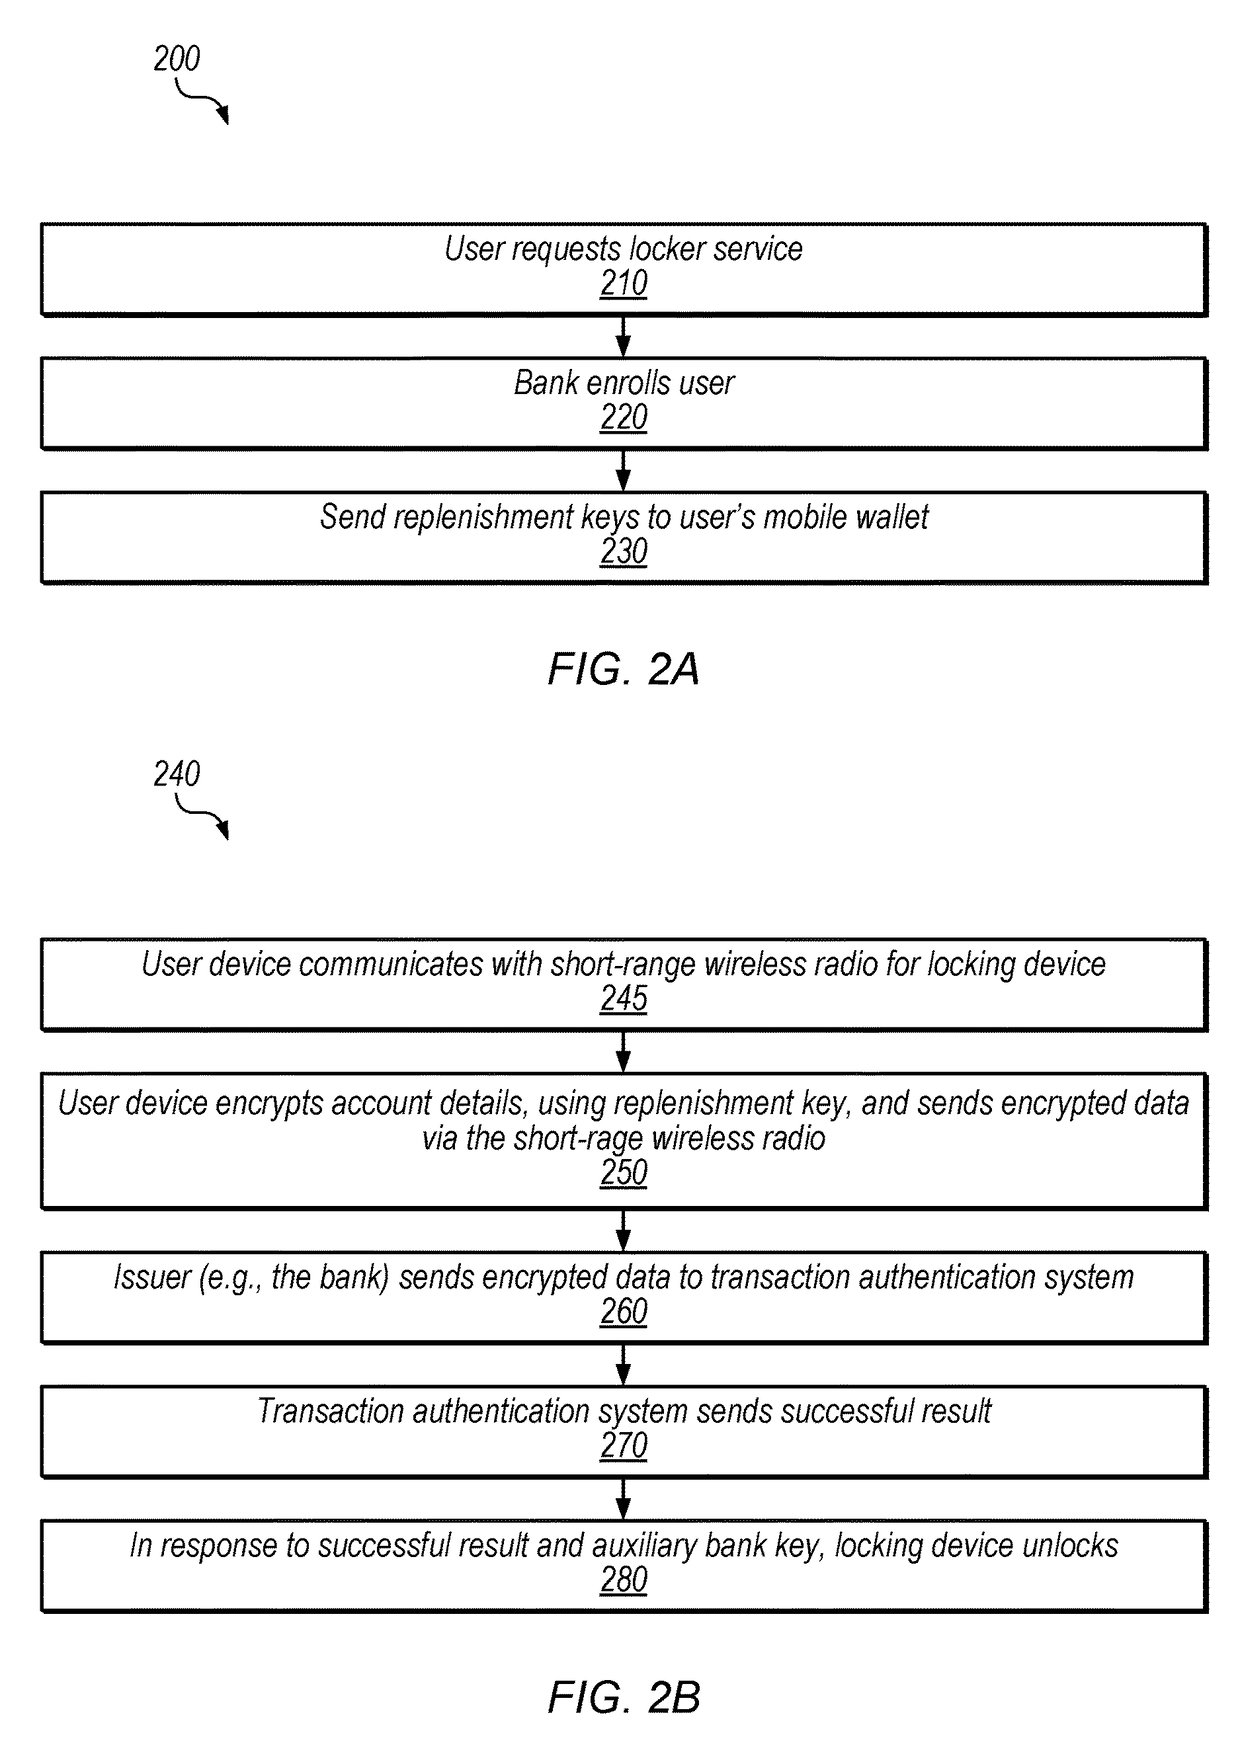 Controlling access to physical compartment using mobile device and transaction authentication system